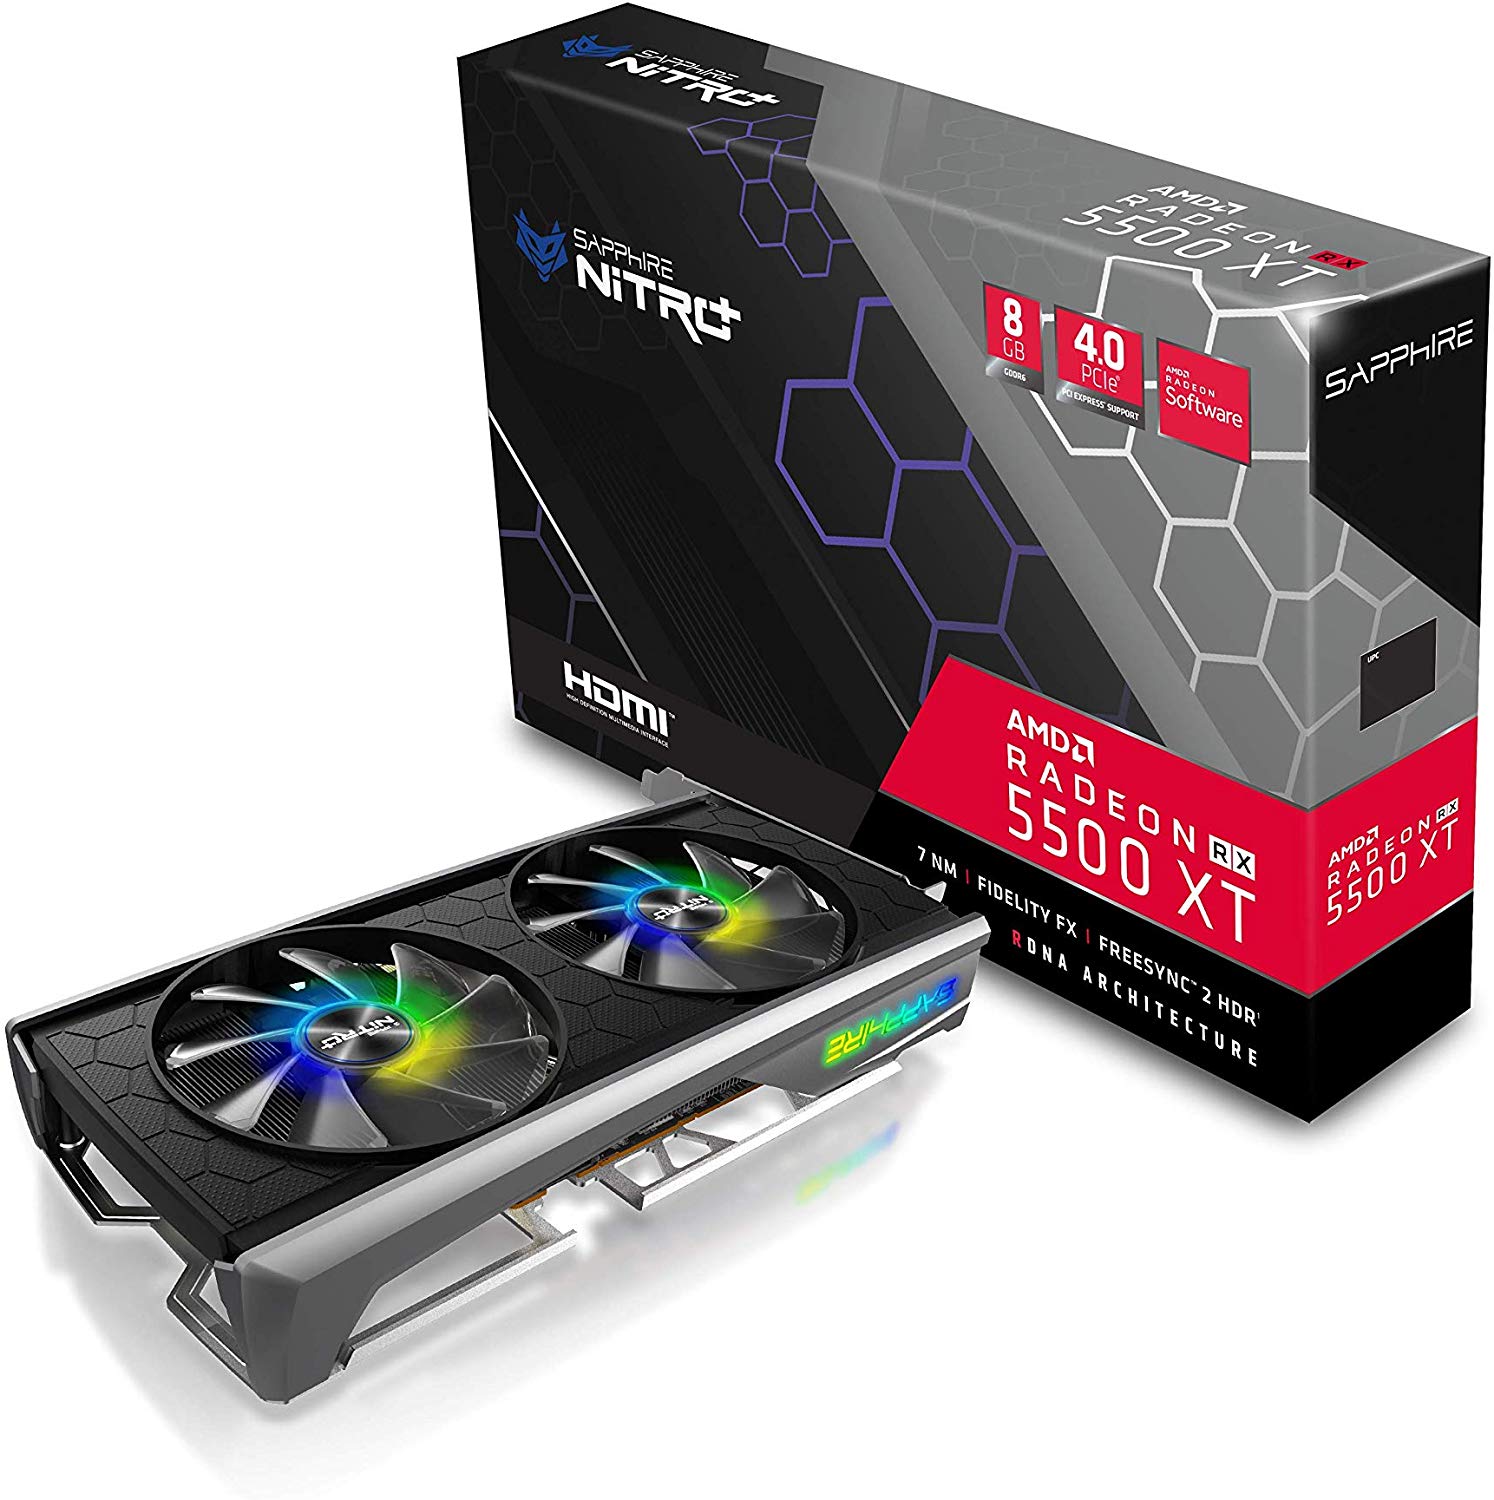 Media asset in full size related to 3dfxzone.it news item entitled as follows: Foto della video card Radeon RX 5500 XT NITRO+ Special Edition di Sapphire | Image Name: news30249_Sapphire-Radeon-RX-5500-XT-NITRO-Plus-Special-Edition_4.jpg